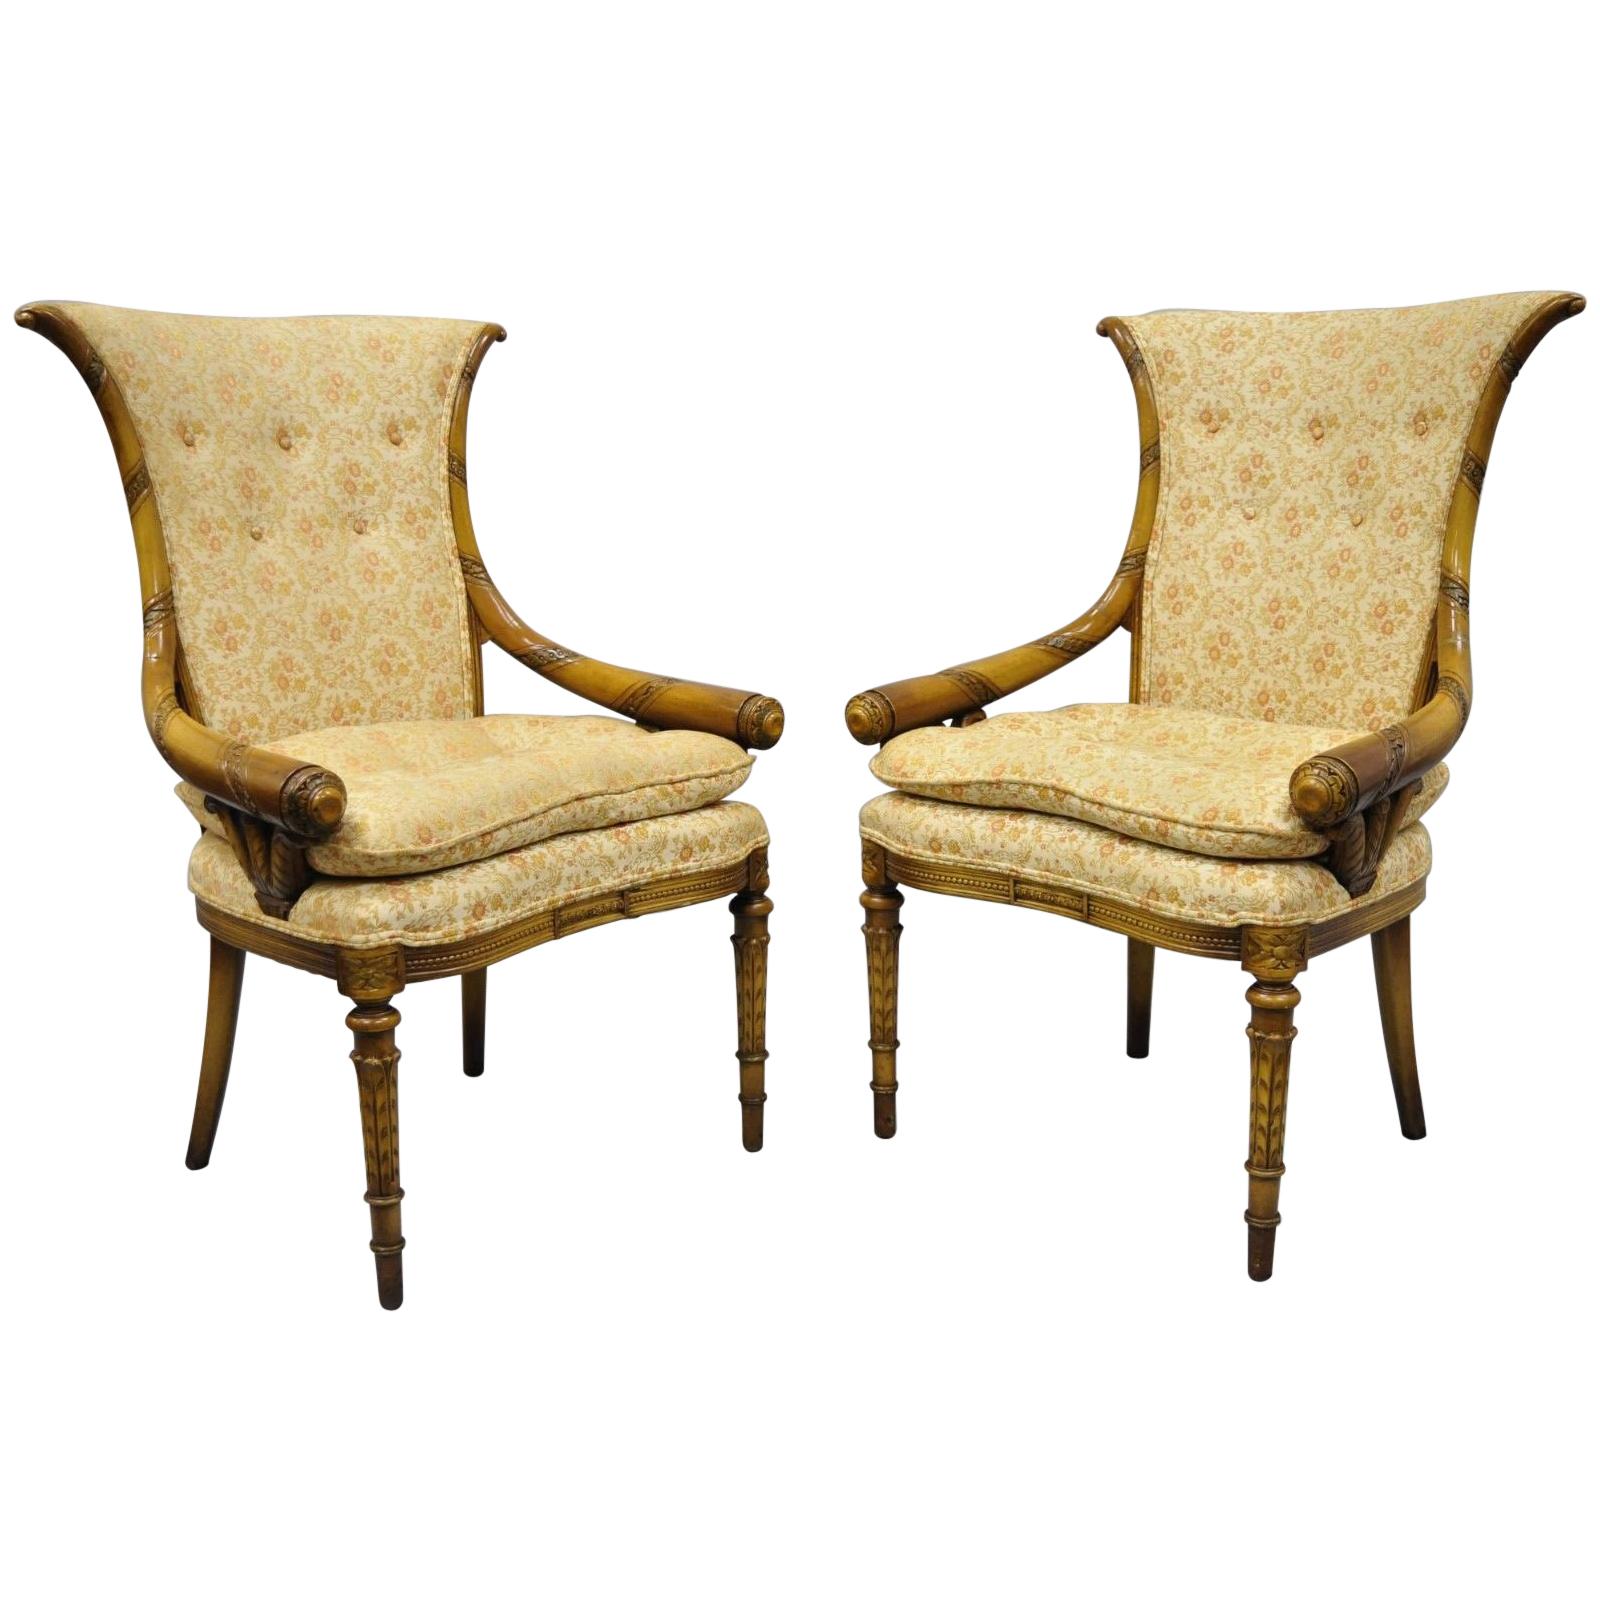 Pair Hollywood Regency French Cornucopia Hiprest Chairs after Grosfeld House